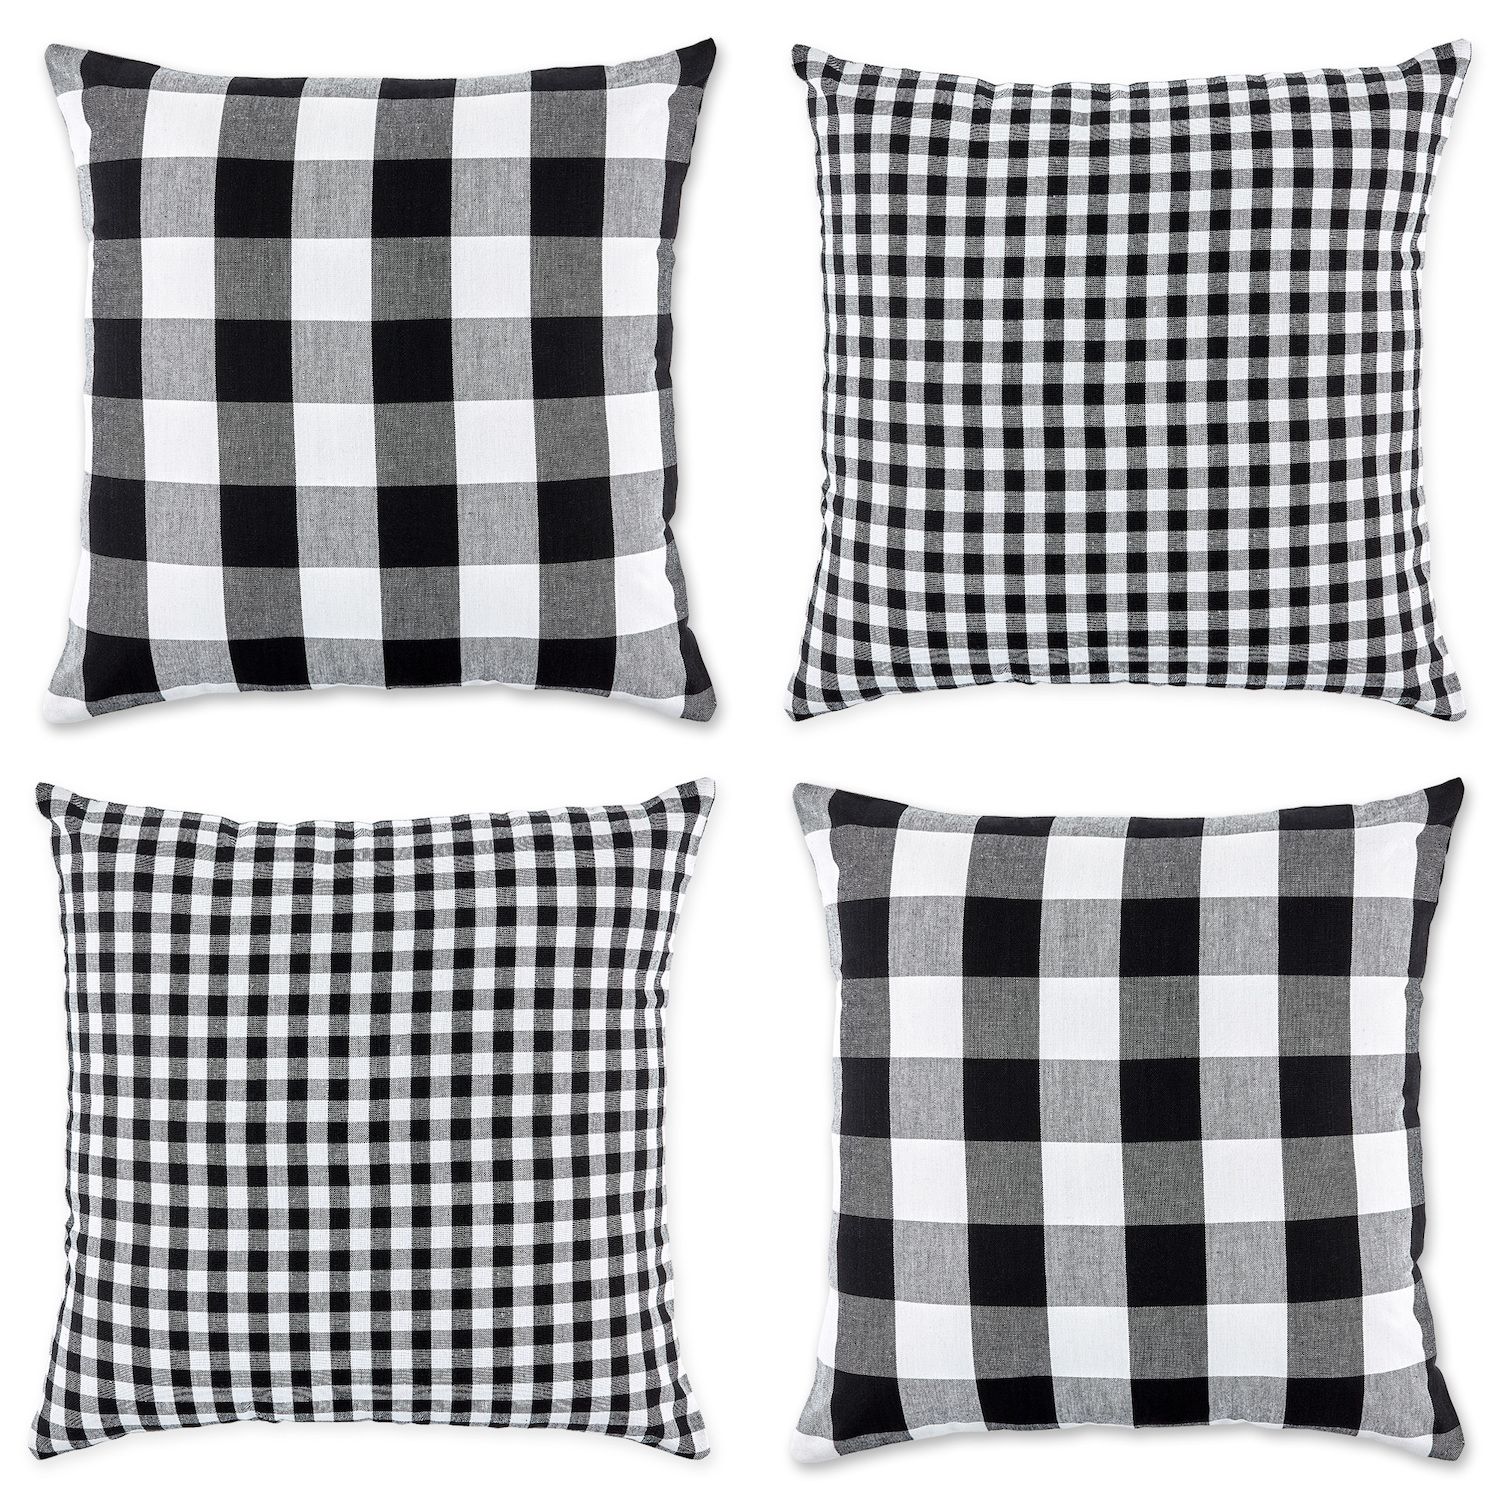 Set of 4 Blank Canvas 17x17 Throw Pillow Covers to Decorate, Plain Cases  for DIY Crafts, Living Room, Modern Home Decor